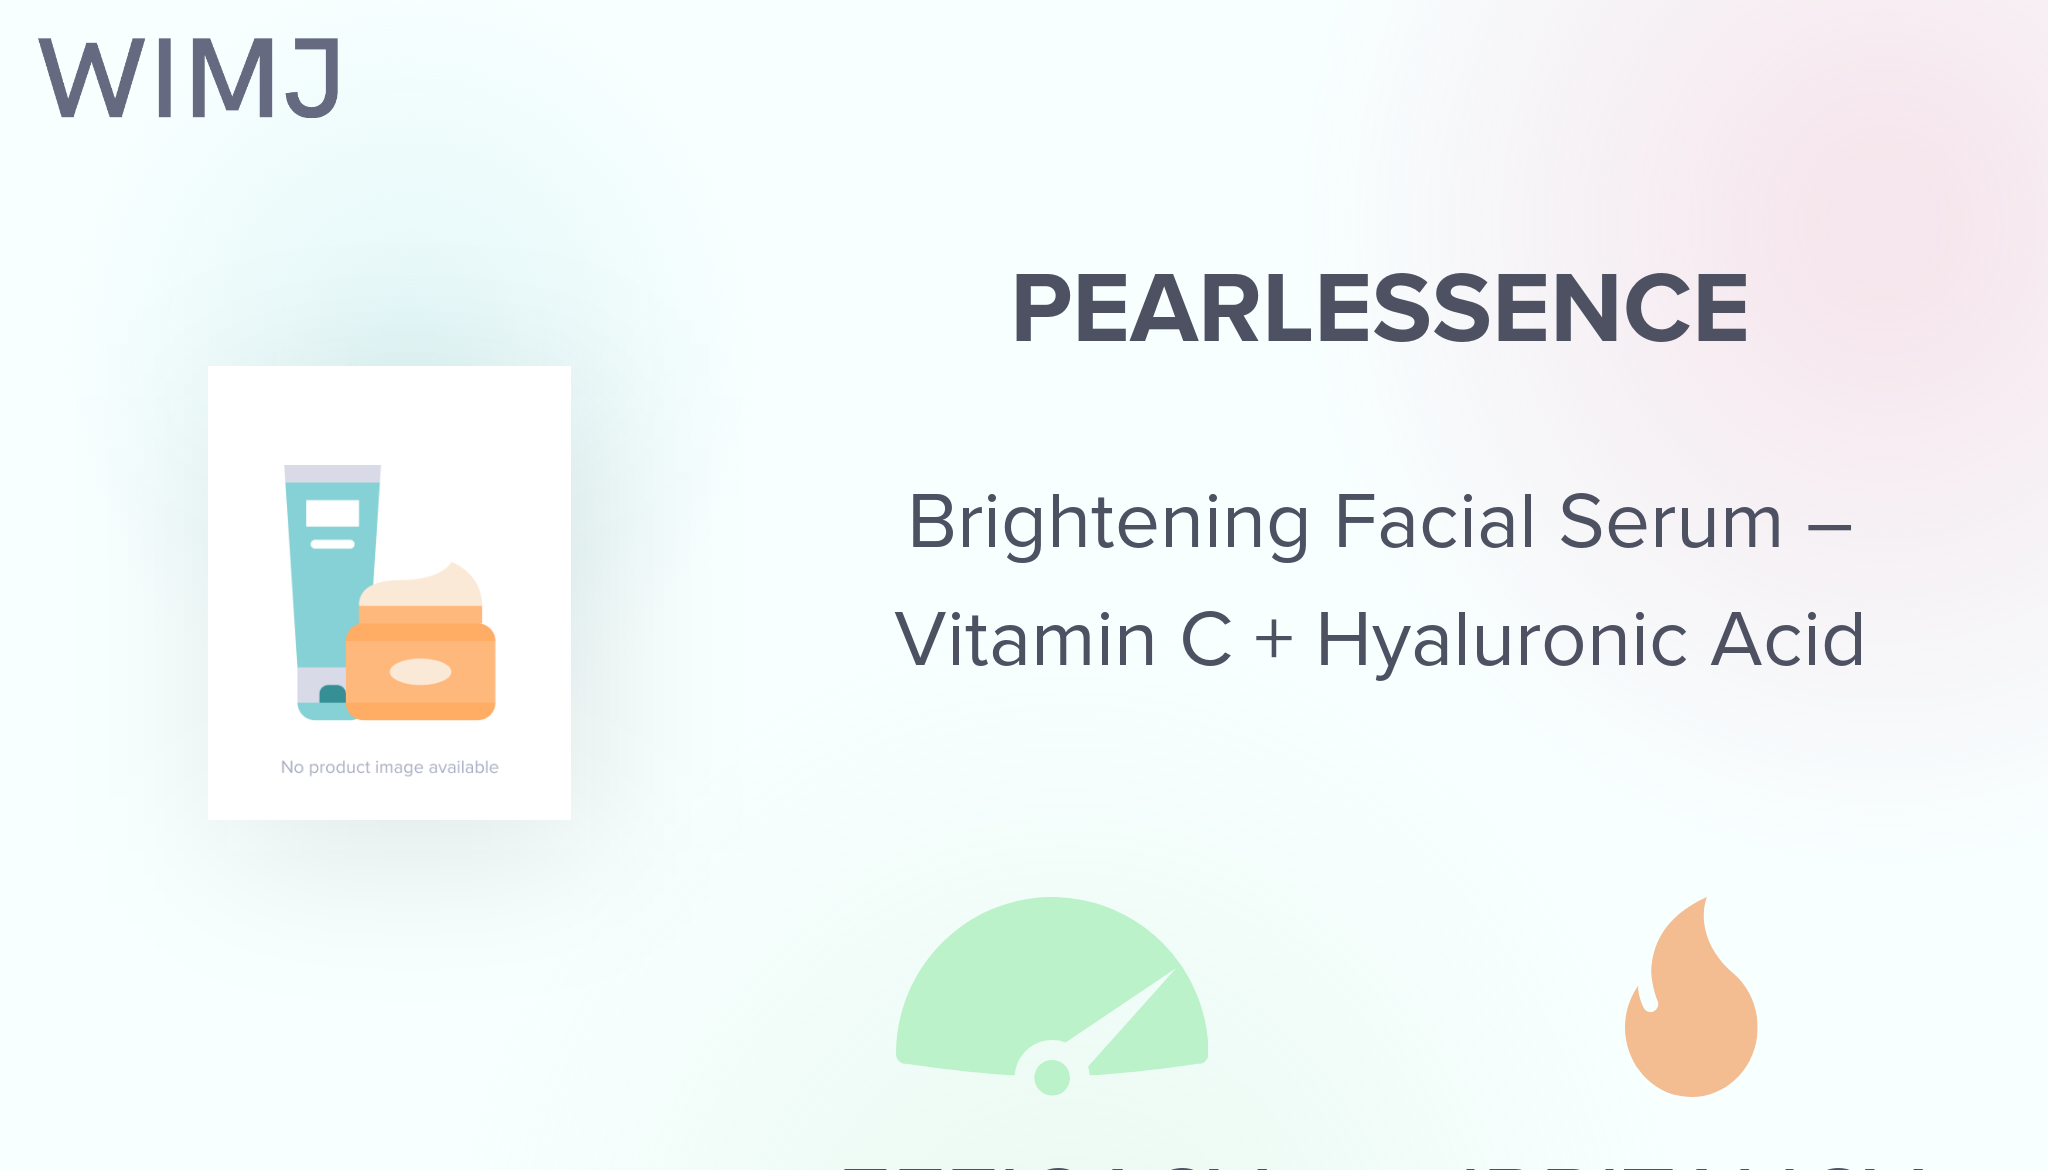 Pearlessence Brightening Facial Serum with Vitamin C & Hyaluronic Acid - Powerful Hydration to Help Plump & Brighten Skin | USA Made (2 oz, 2 Pack)